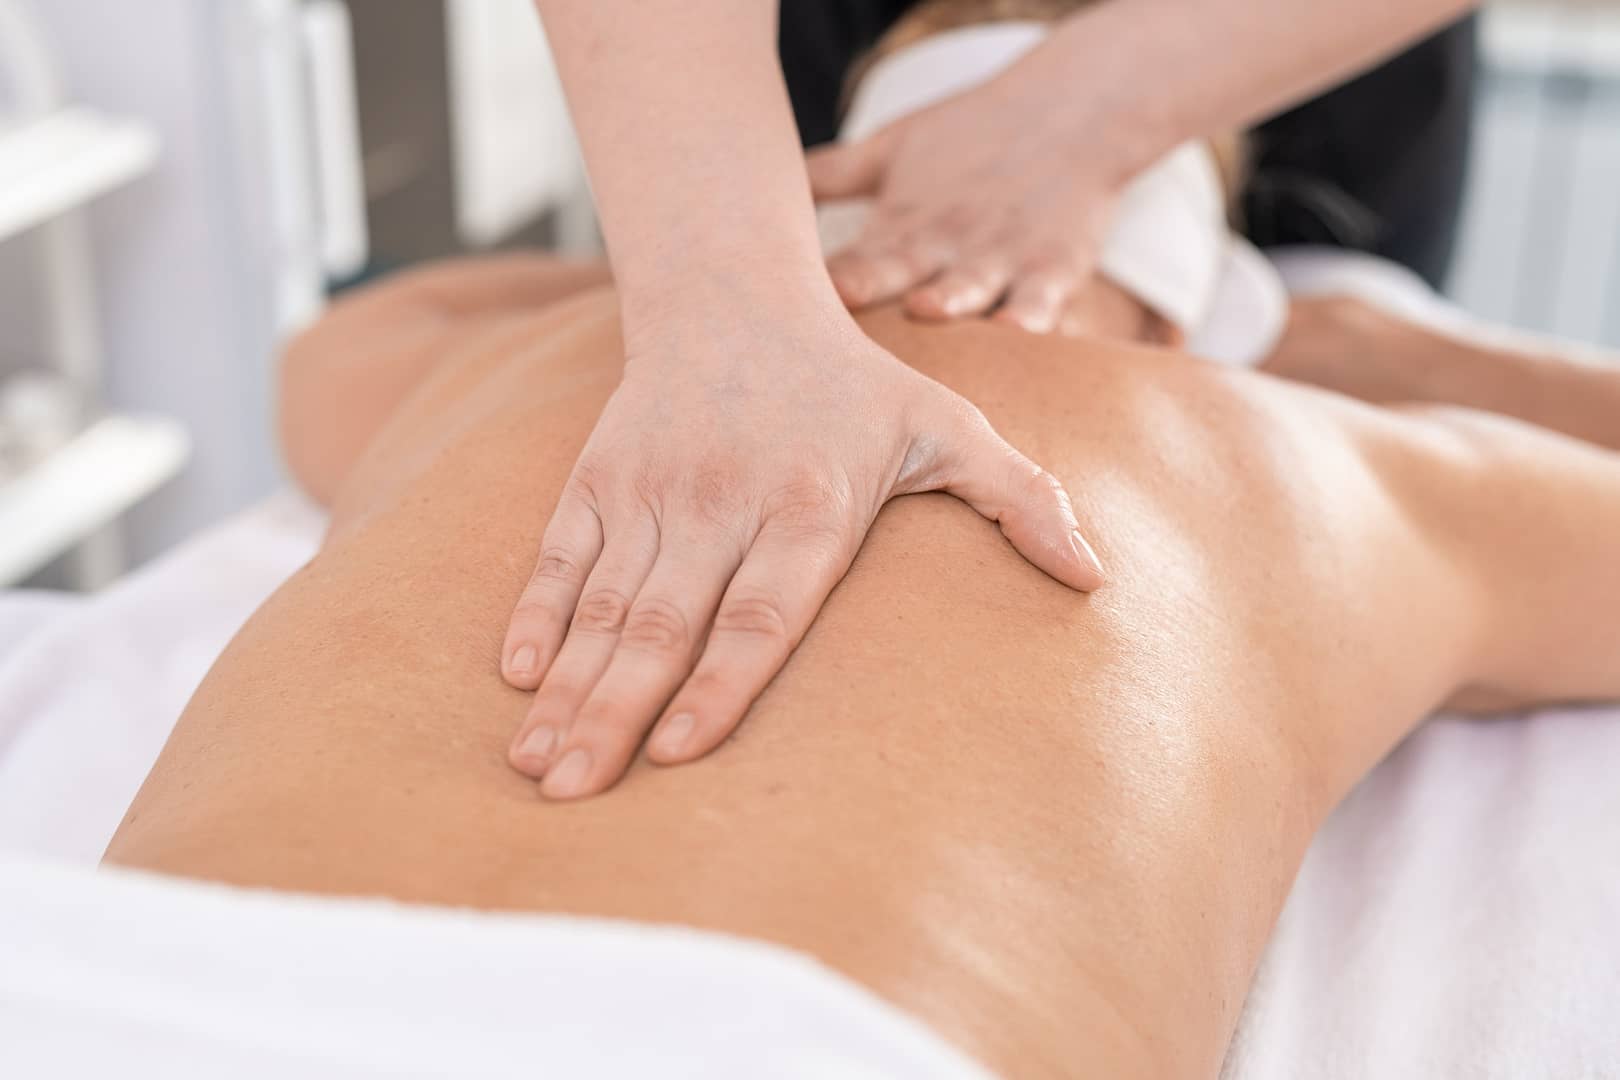 Massage therapy for back pain The Back Pain Project helps with fast affordable back pain treatments in Stamford Darien Norwalk and New Canaan 203-656-3638 fast affordable back pain relief